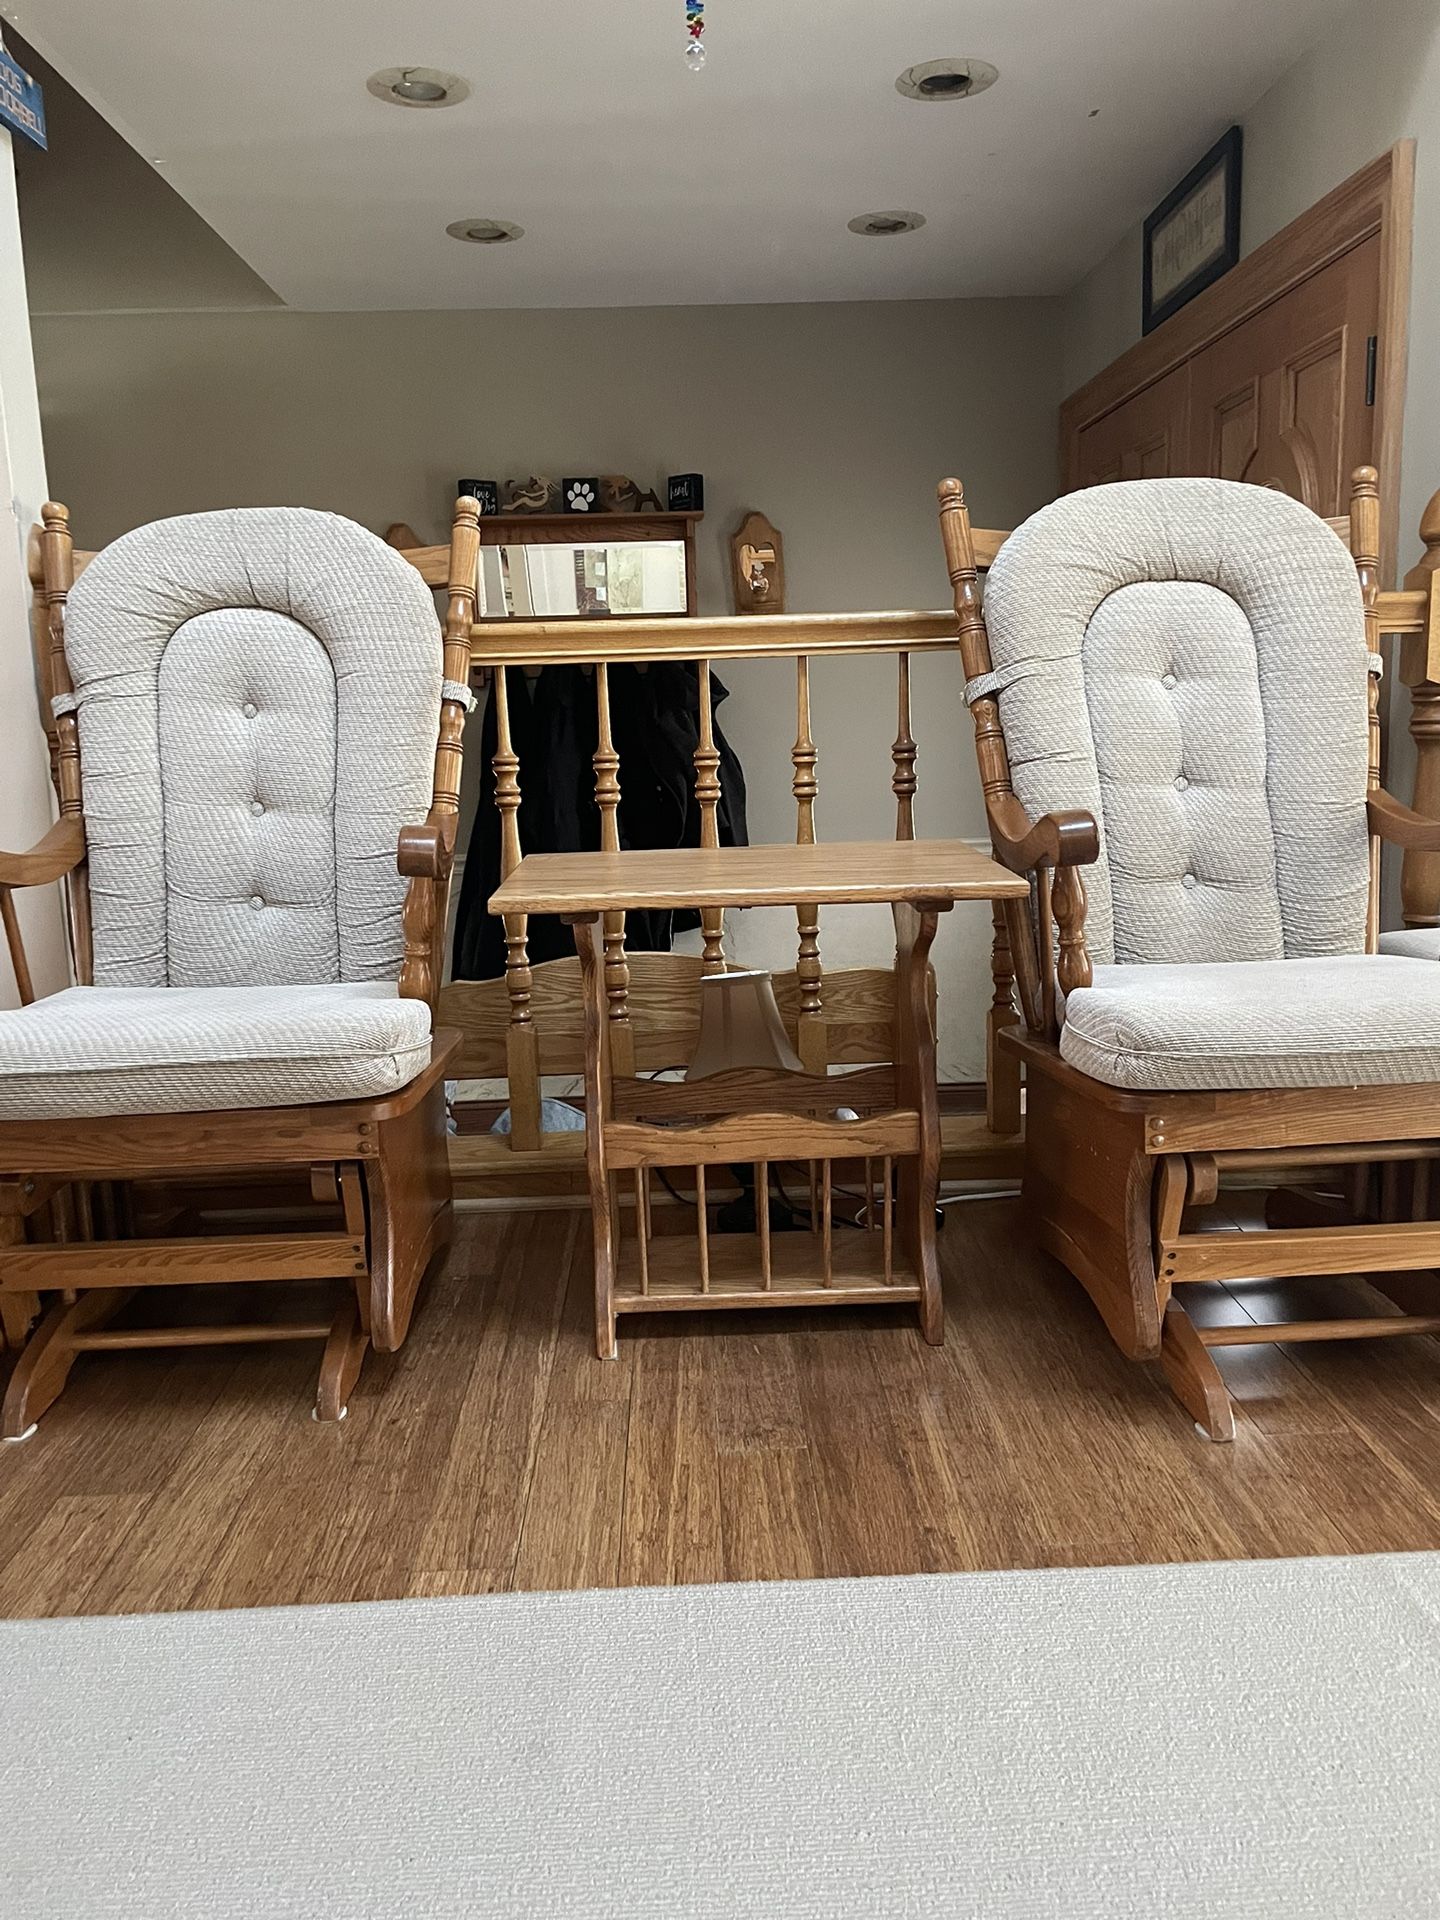 Rocking Chairs And Table